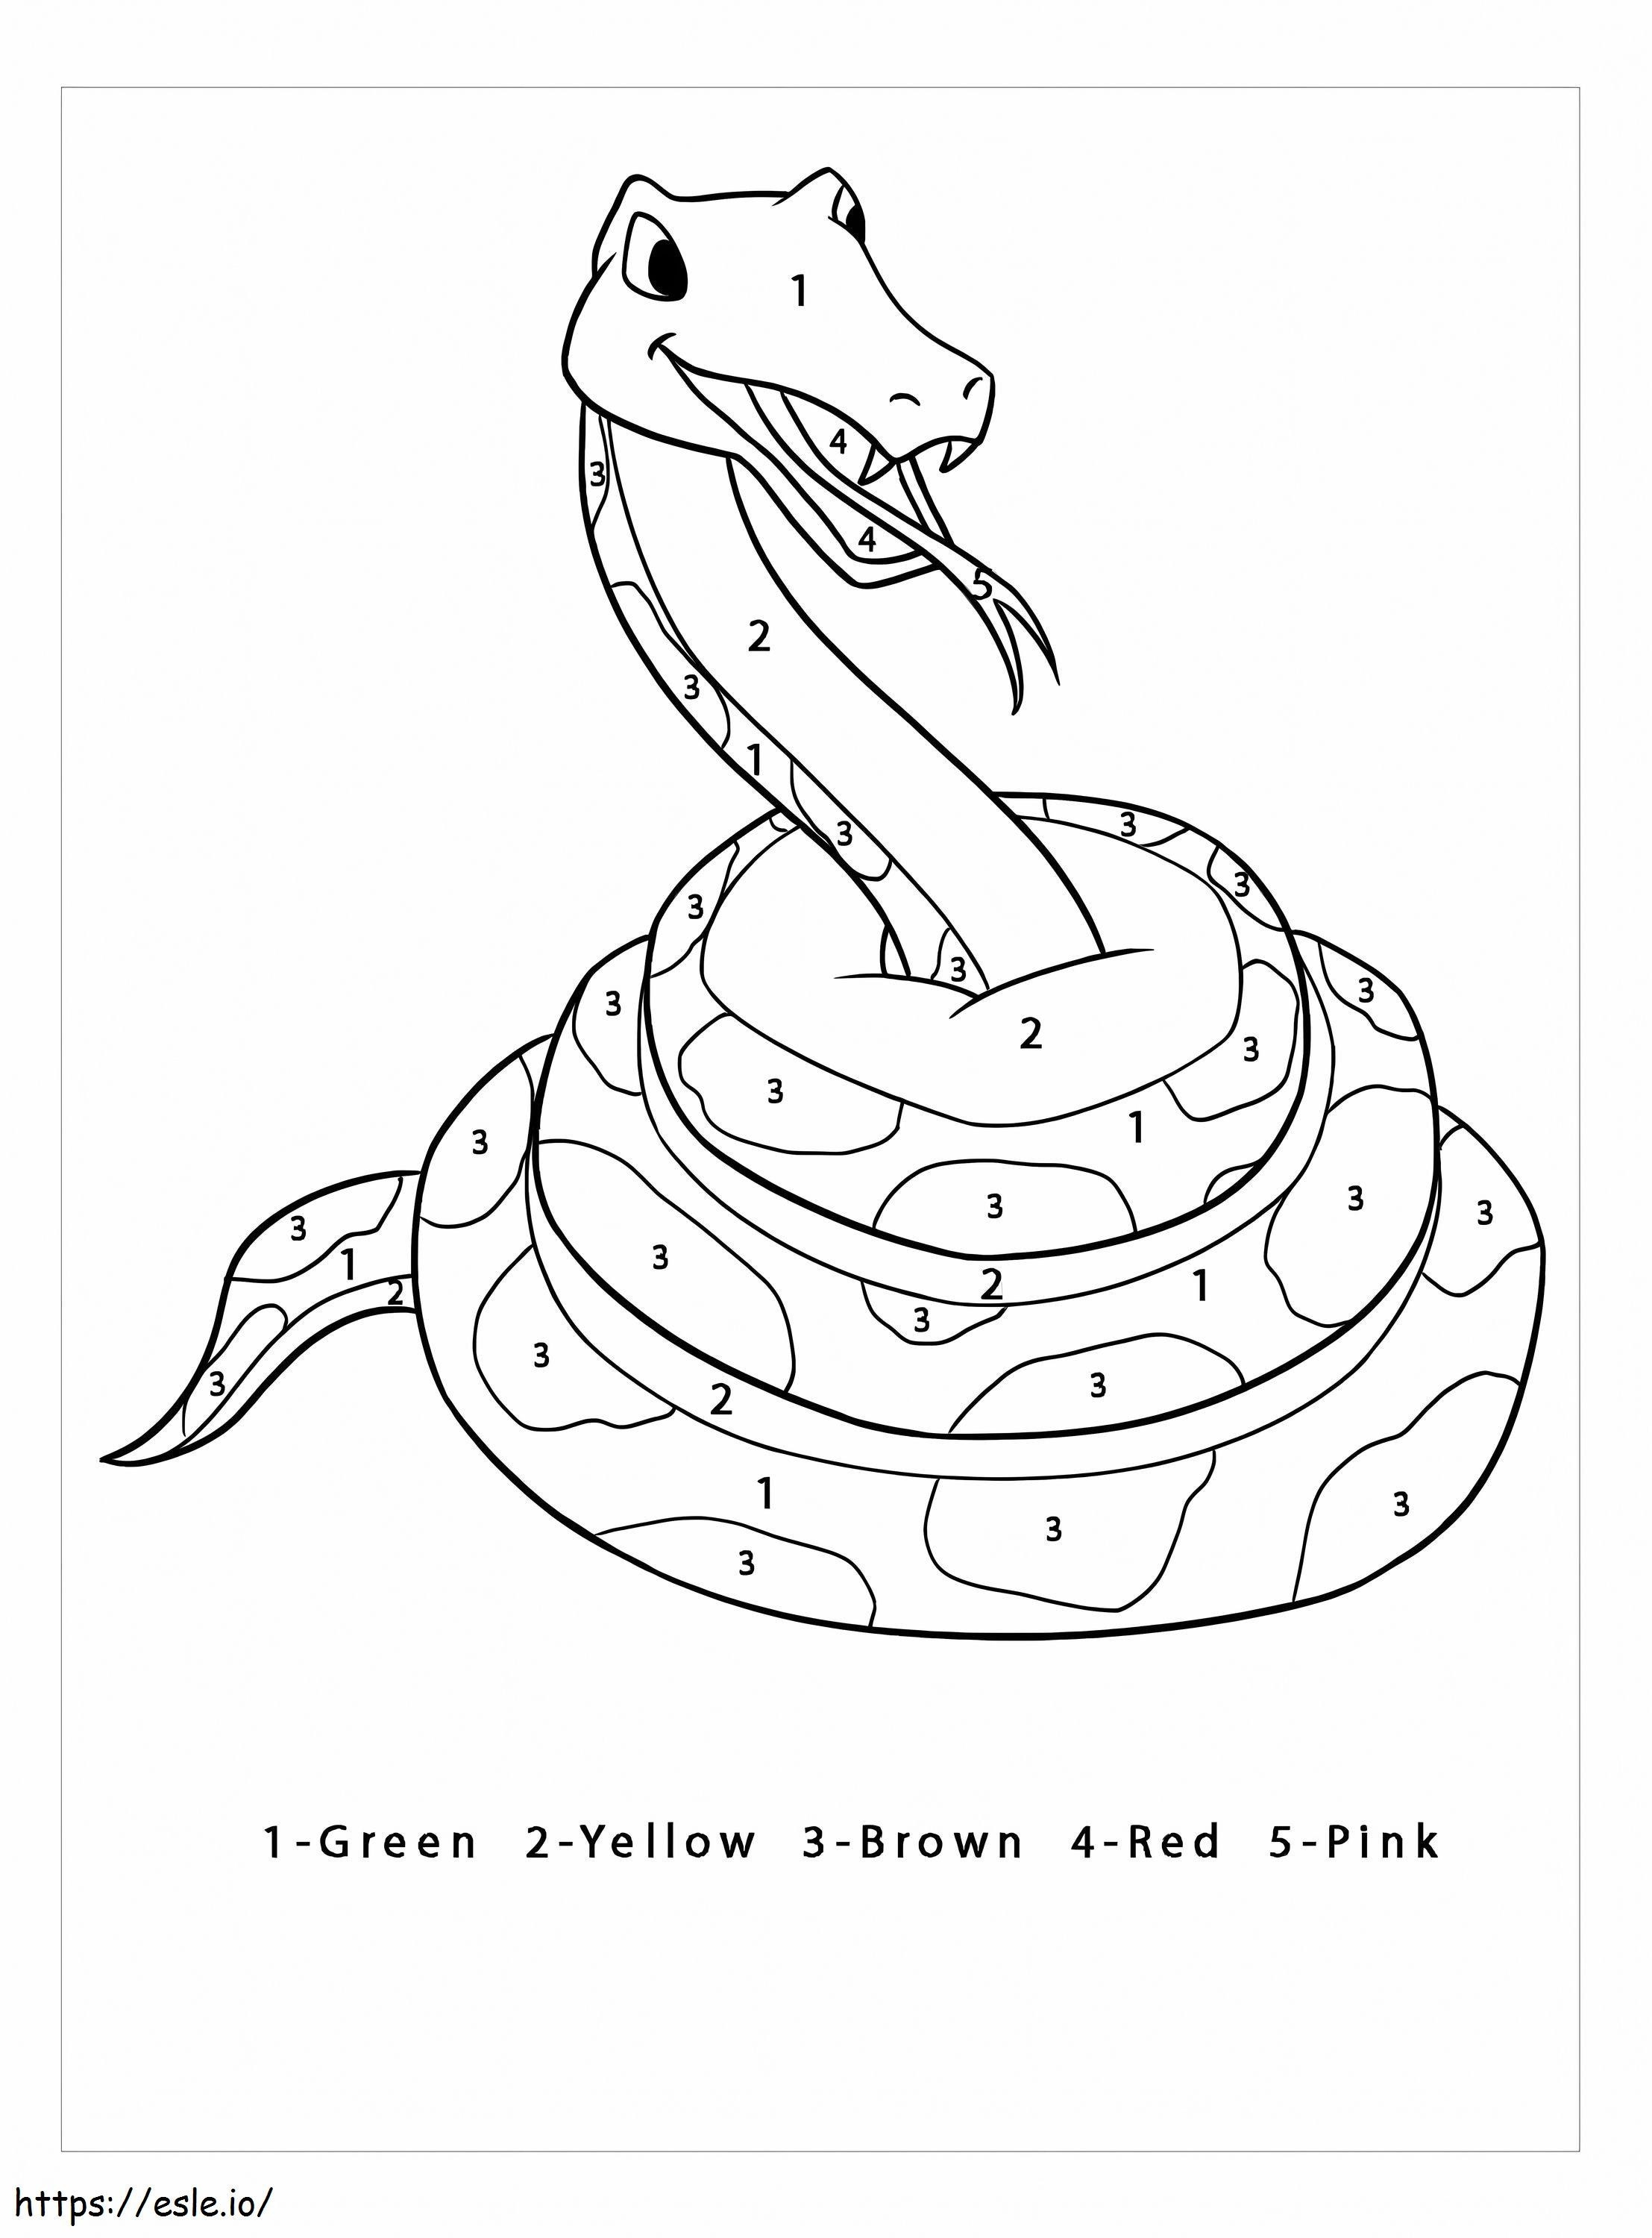 Snake Color By Number coloring page